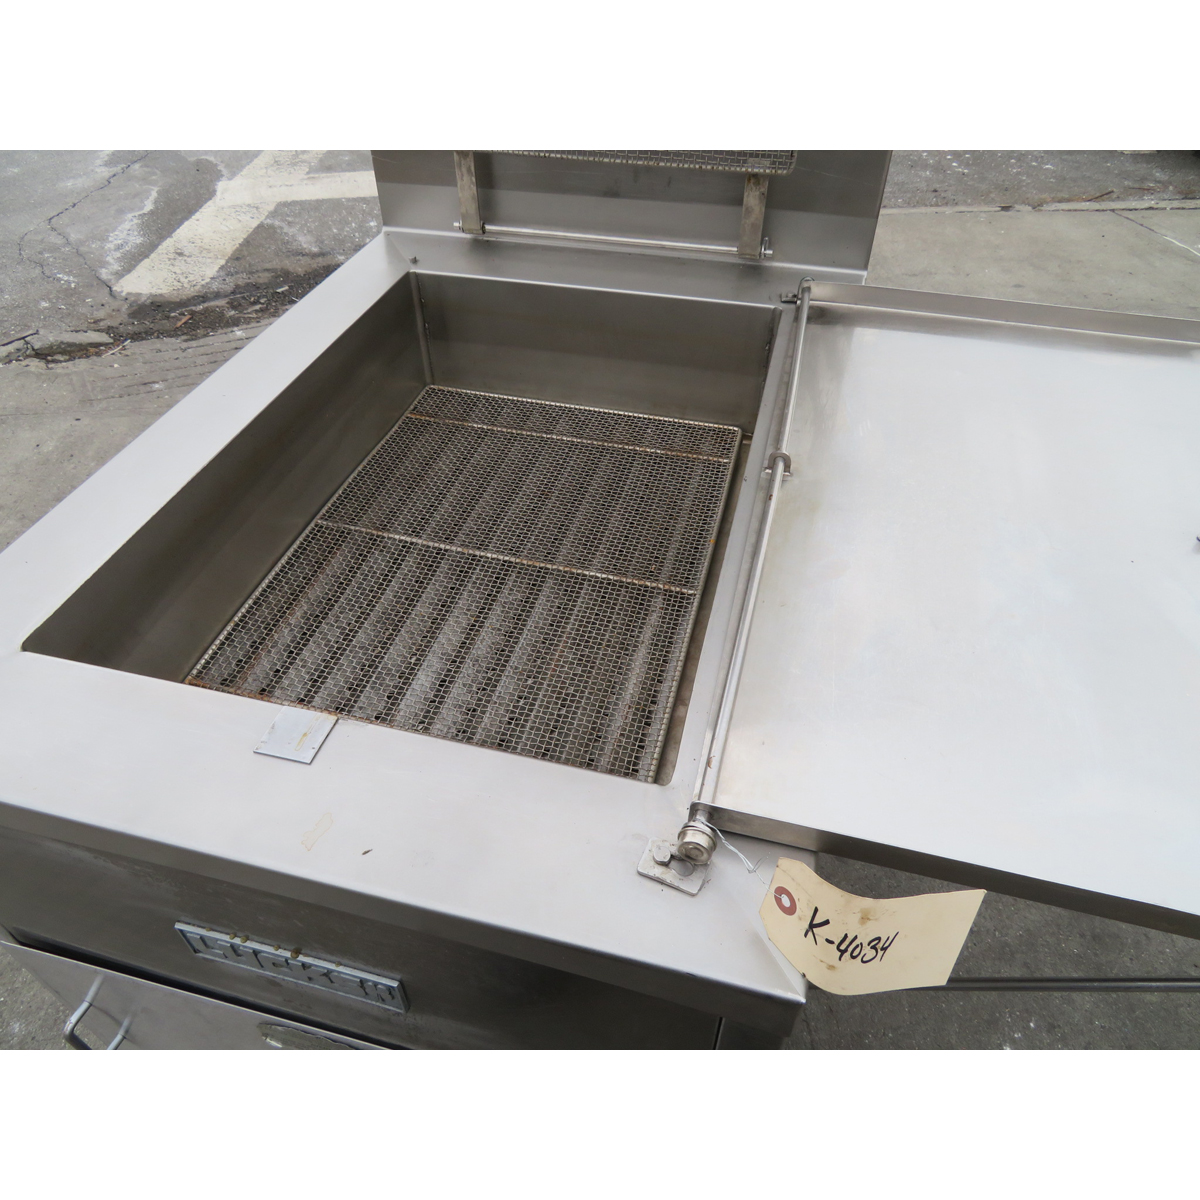 Lucks G1826 Gas Donut Fryer with Filtration System, Used Good Condition image 1